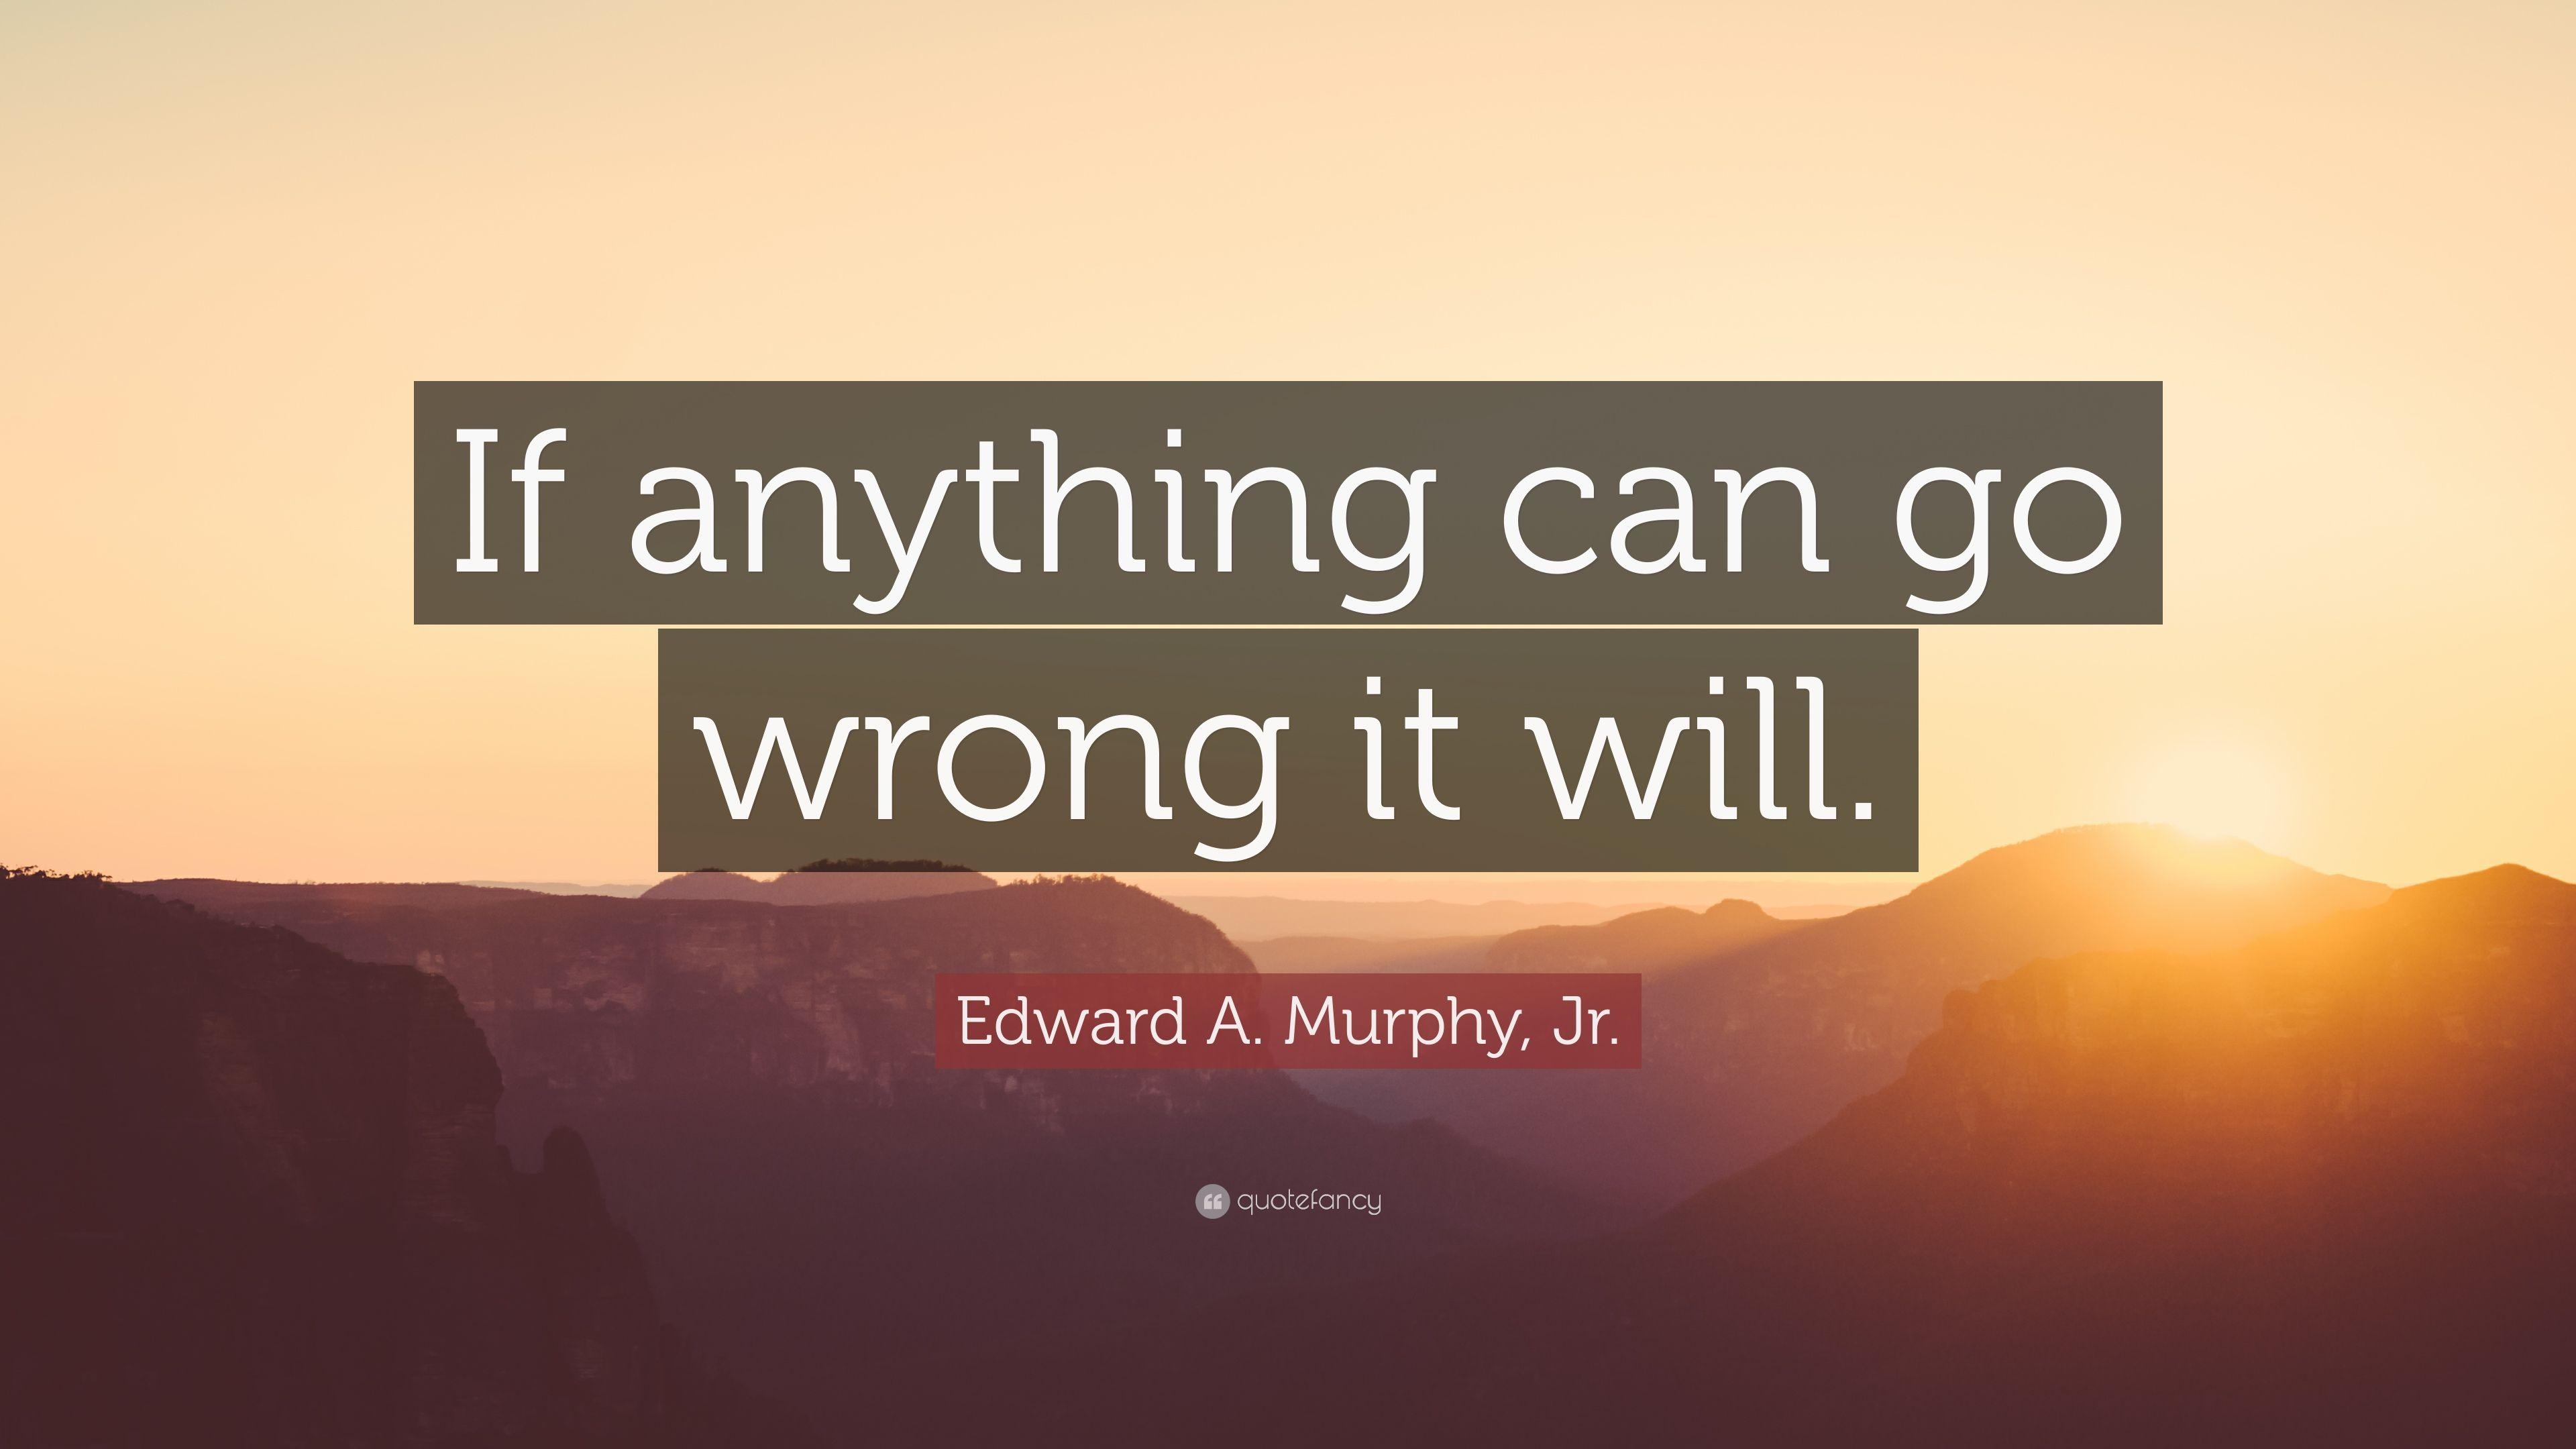 Edward A. Murphy, Jr. Quote: “If anything can go wrong it will